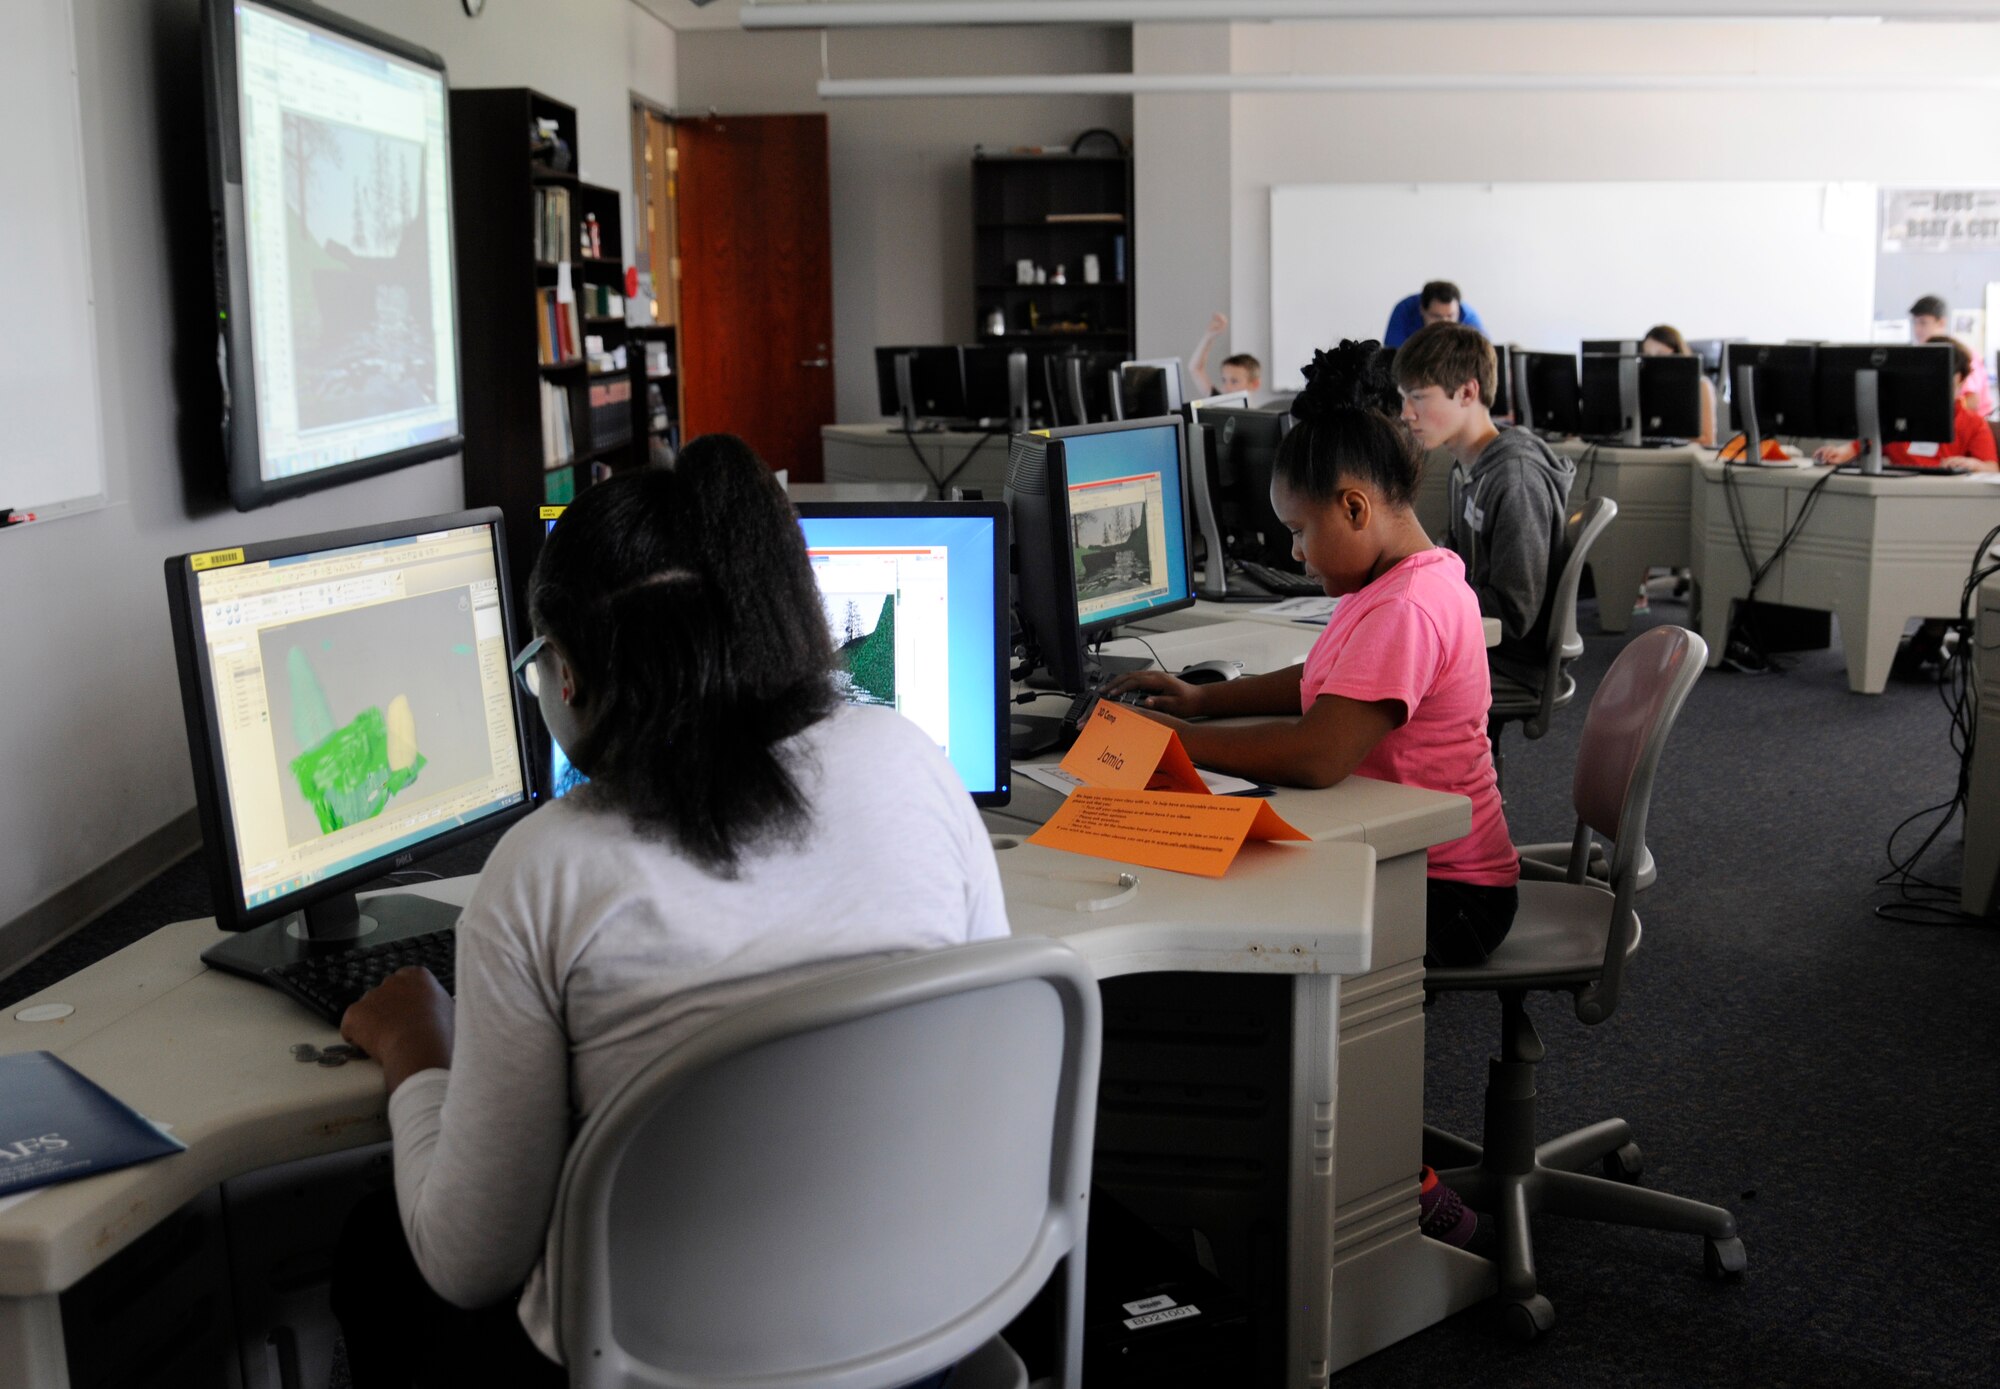 Kids from the 188th Wing participate in 3D Animation Camp at the University of Arkansas-Fort Smith on June 24, 2015. The 3D Animation Camp was a two and a half day camp that offered military children the opportunity to learn what it takes to design games, movie clips and commercials. Tuition for the class was provided through the Child and Youth Program at the National Guard Bureau, Washington D.C. The Child and Youth Program supports the social, emotional and academic needs of military children by lifting them up with knowledge and positive encouragement. (U.S. Air National Guard photo by Staff Sgt. Hannah Dickerson/Released)